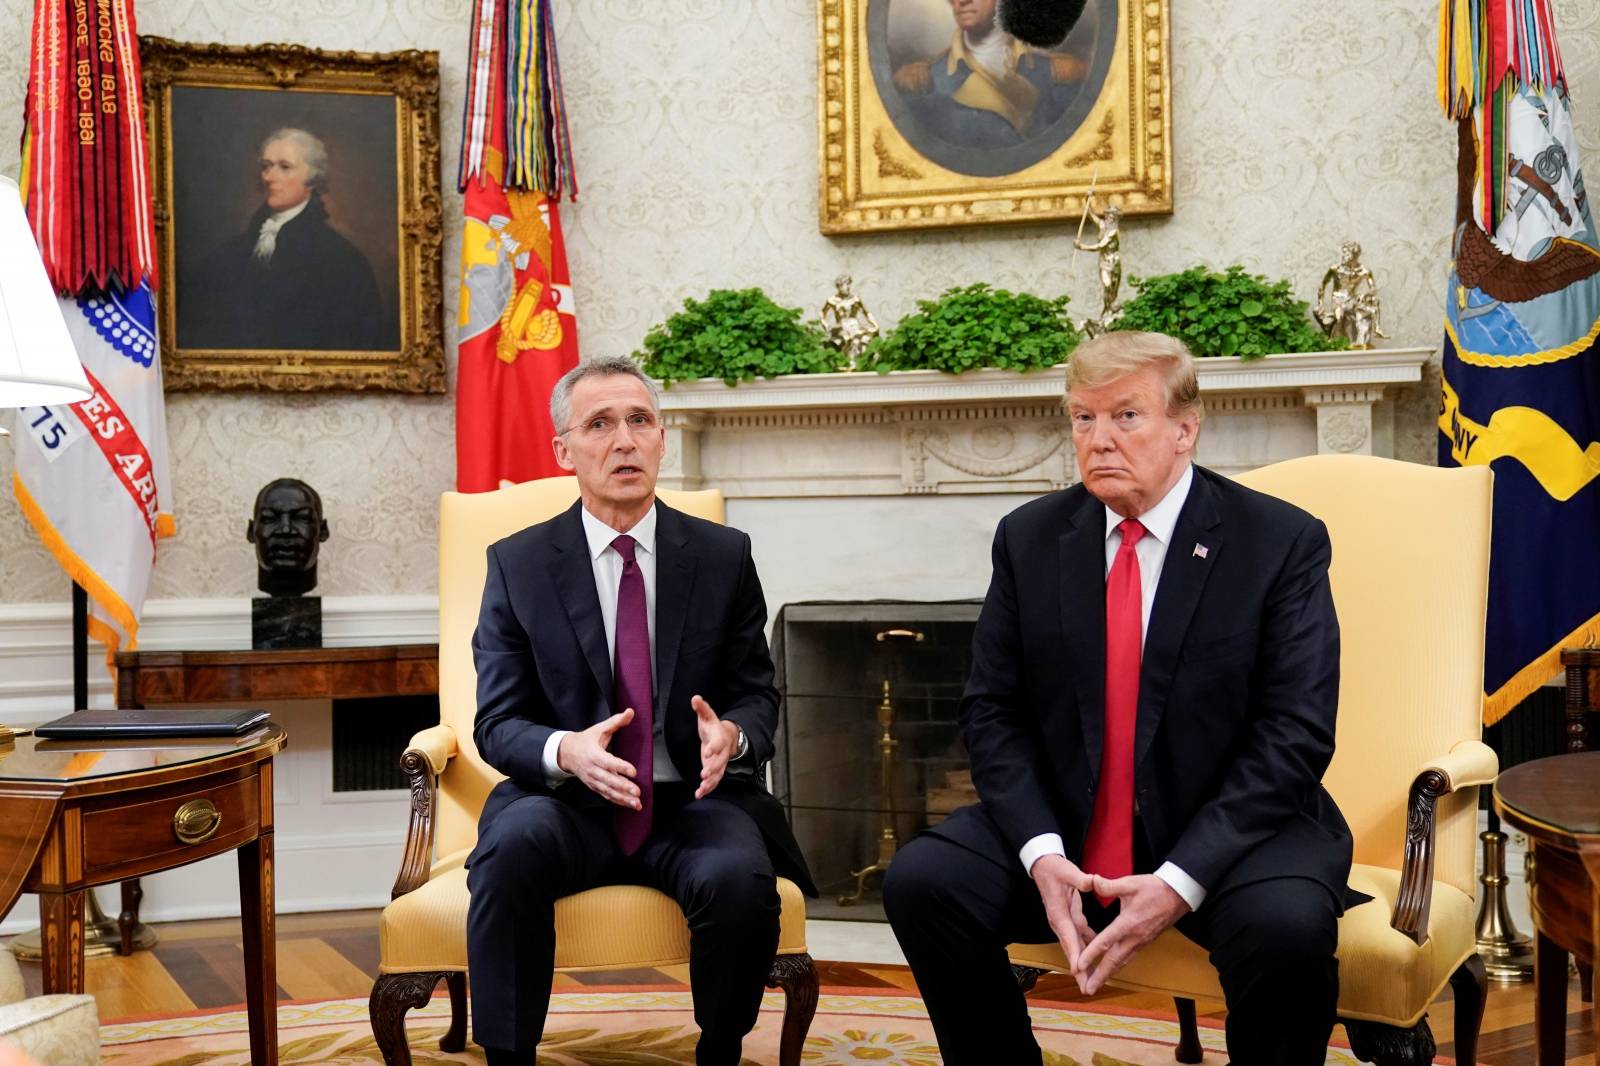 U.S. President Trump meets with NATO Secretary General Stoltenberg at the White House in Washington